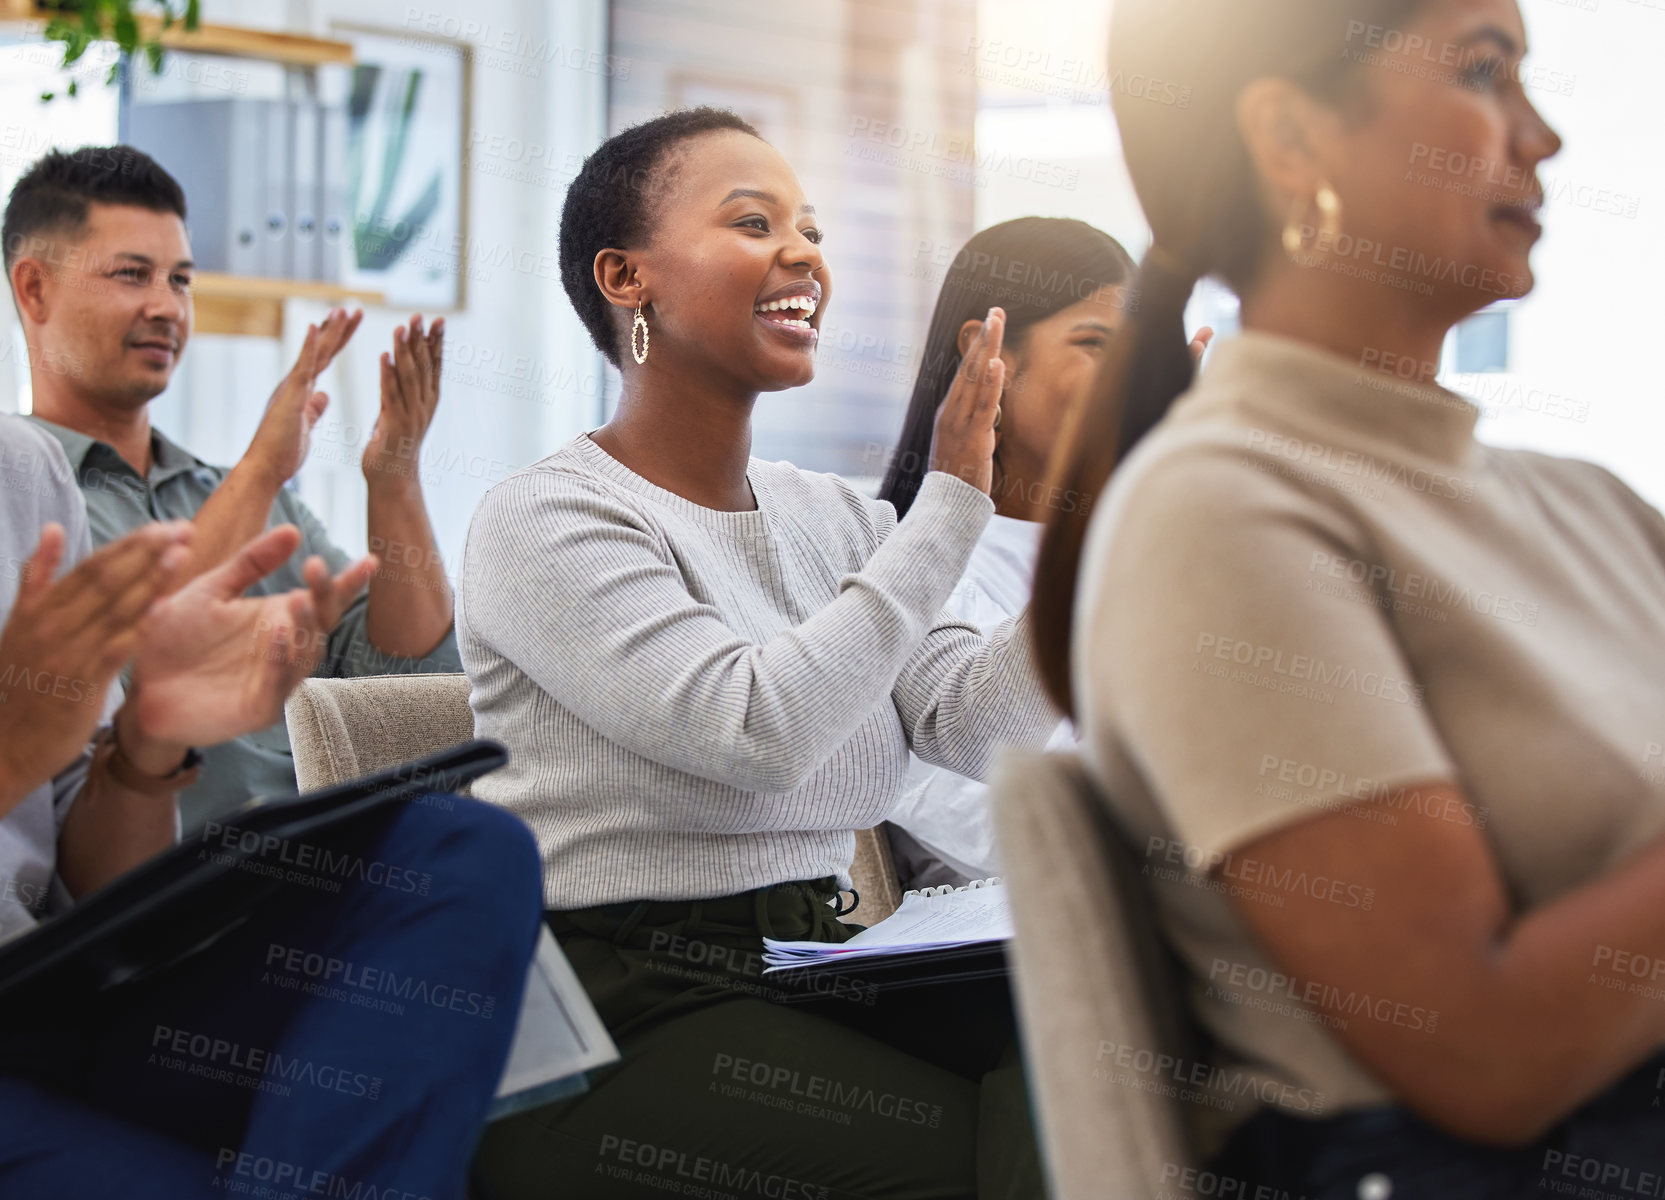 Buy stock photo Shot of a group of people clapping and smiling during a meeting at work